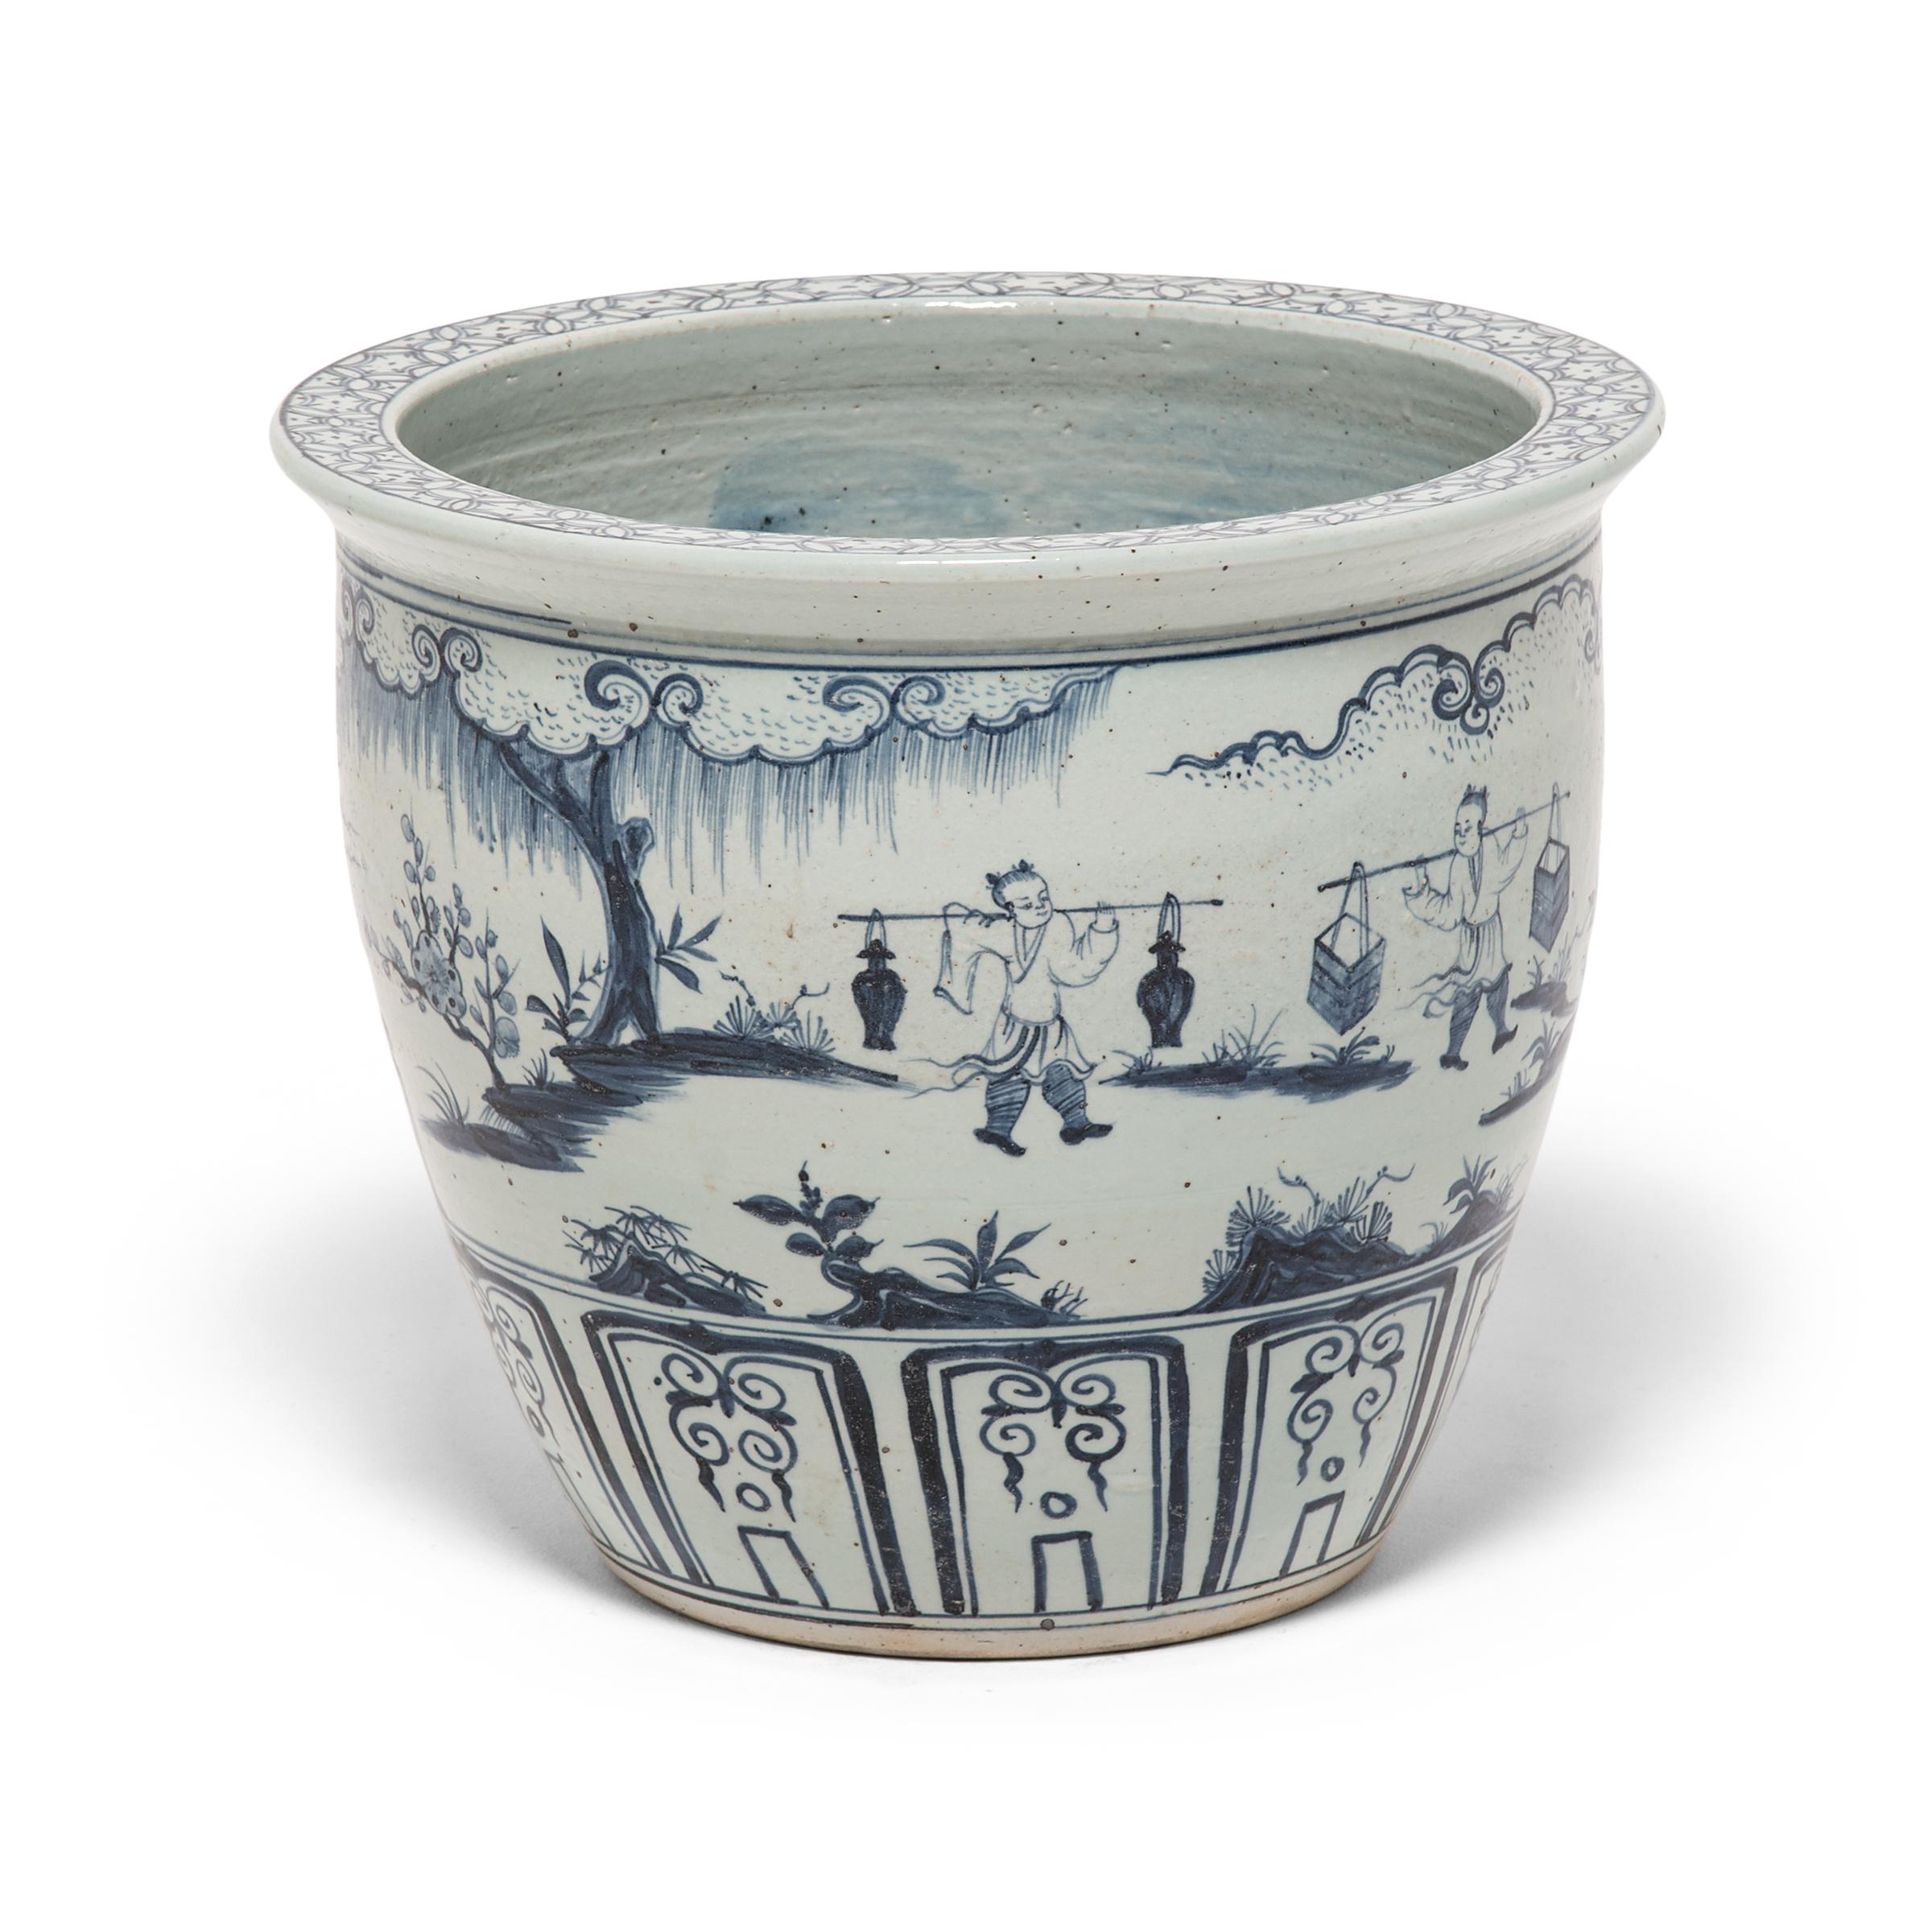 This charming blue and white scroll jar speaks to an era and way of life long gone. With unique scale and a wide mouth, this contemporary jar resembles the vessels used to store and display painted scrolls in a Qing dynasty scholar's studio. The